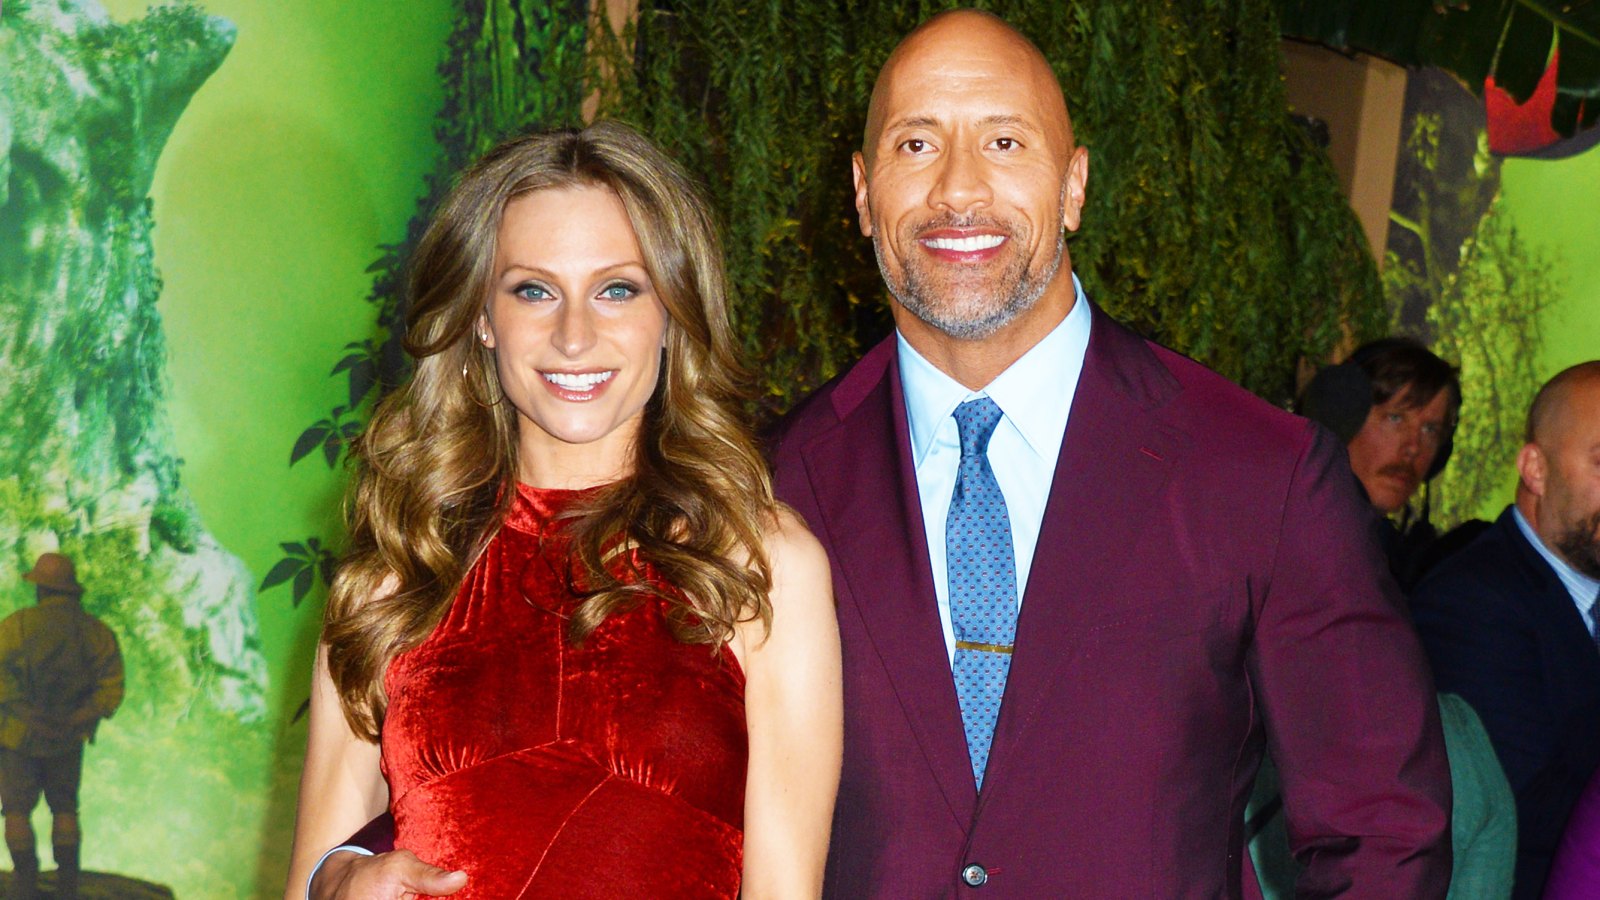 The Rock Says He’s ‘Making More Babies’ in Quarantine